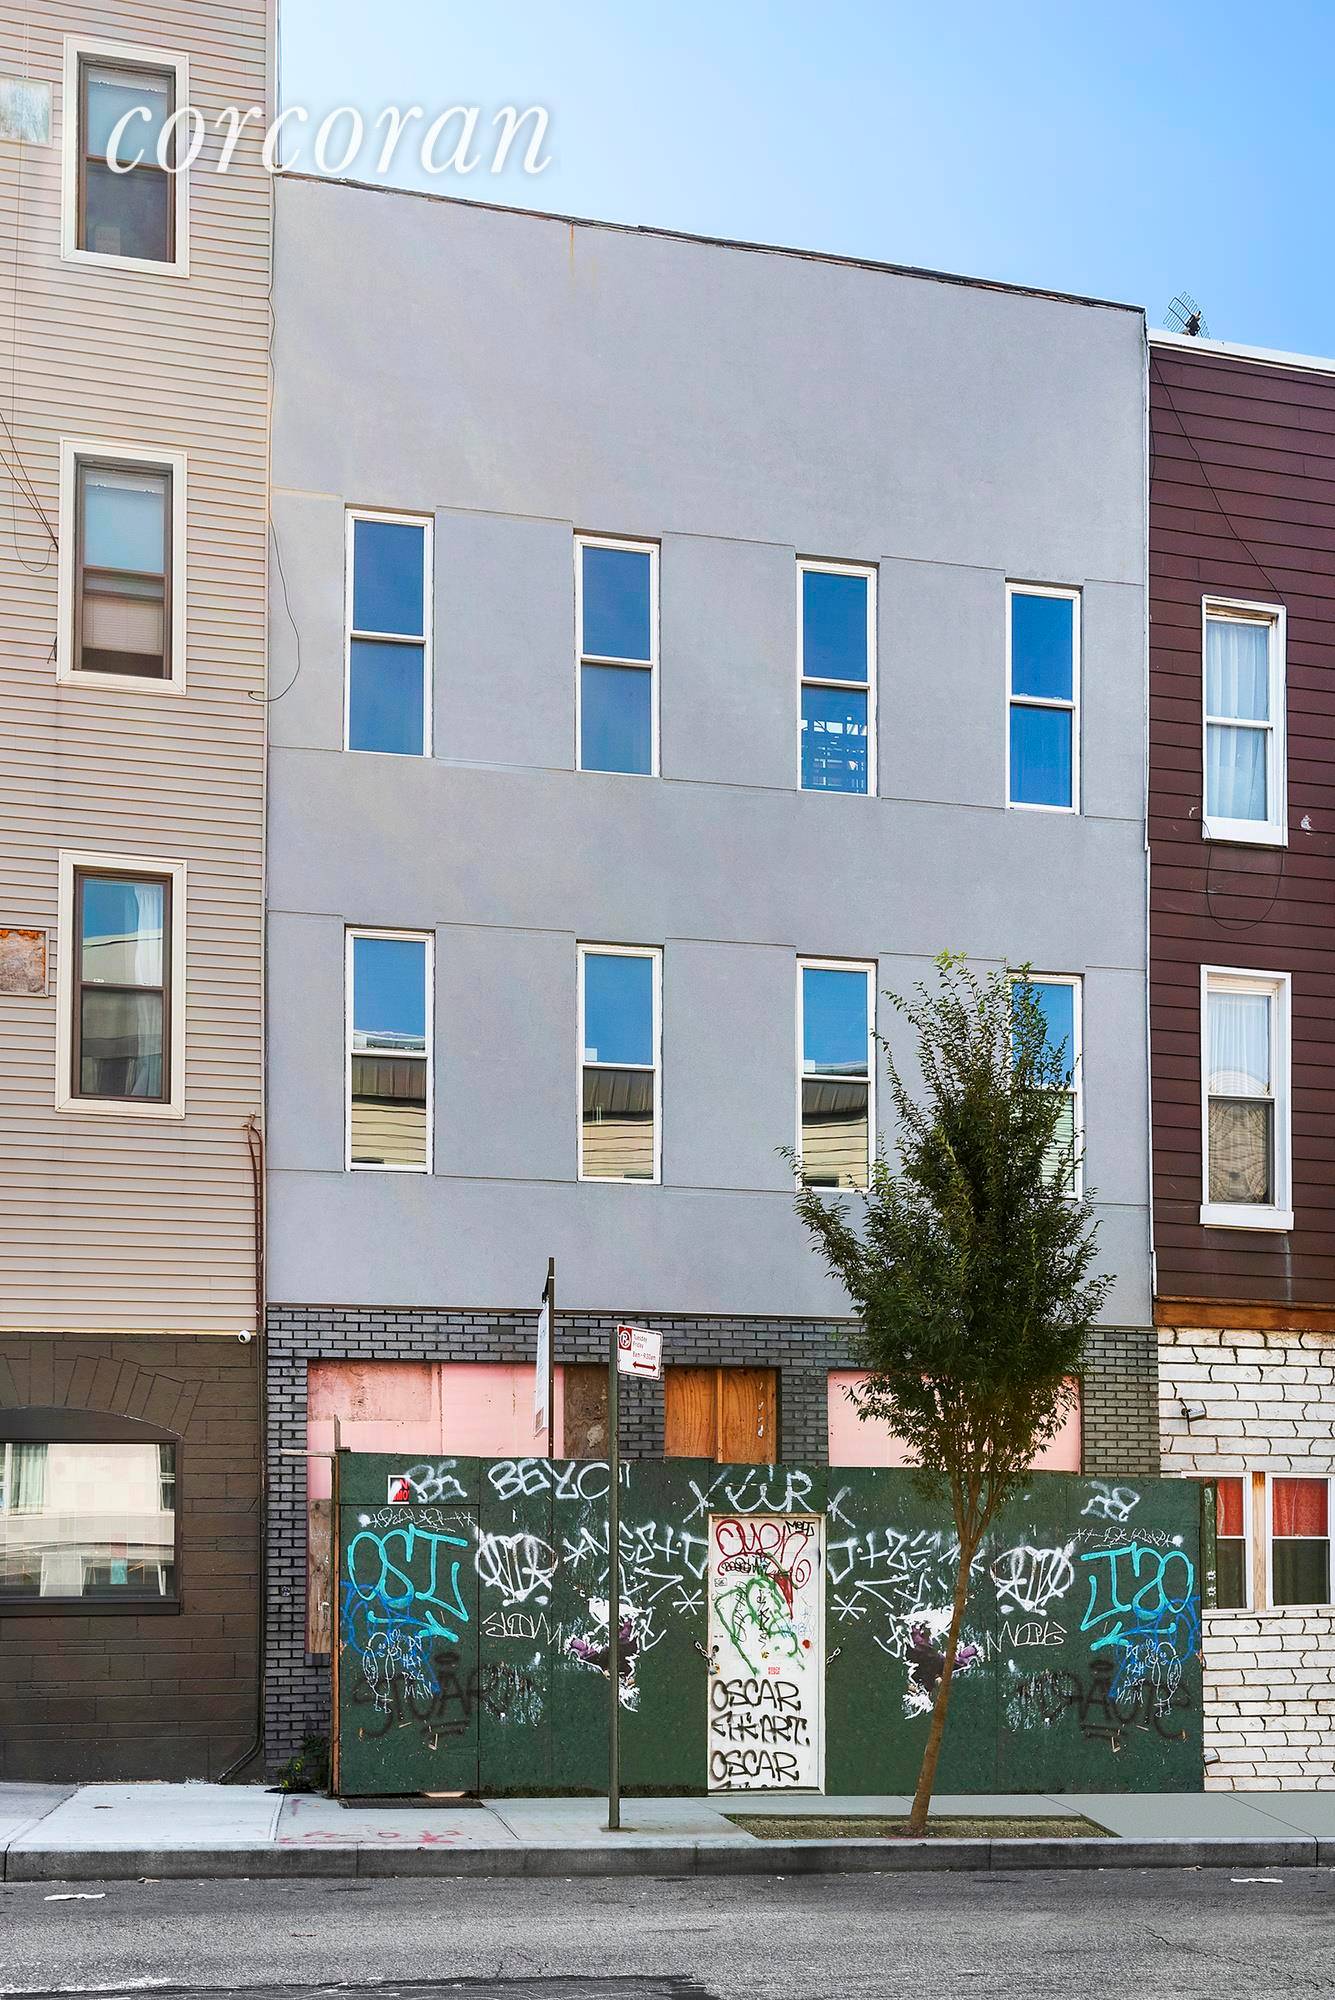 204 Nassau Avenue offers the discerning buyer a blank canvas in the heart of Greenpoint.